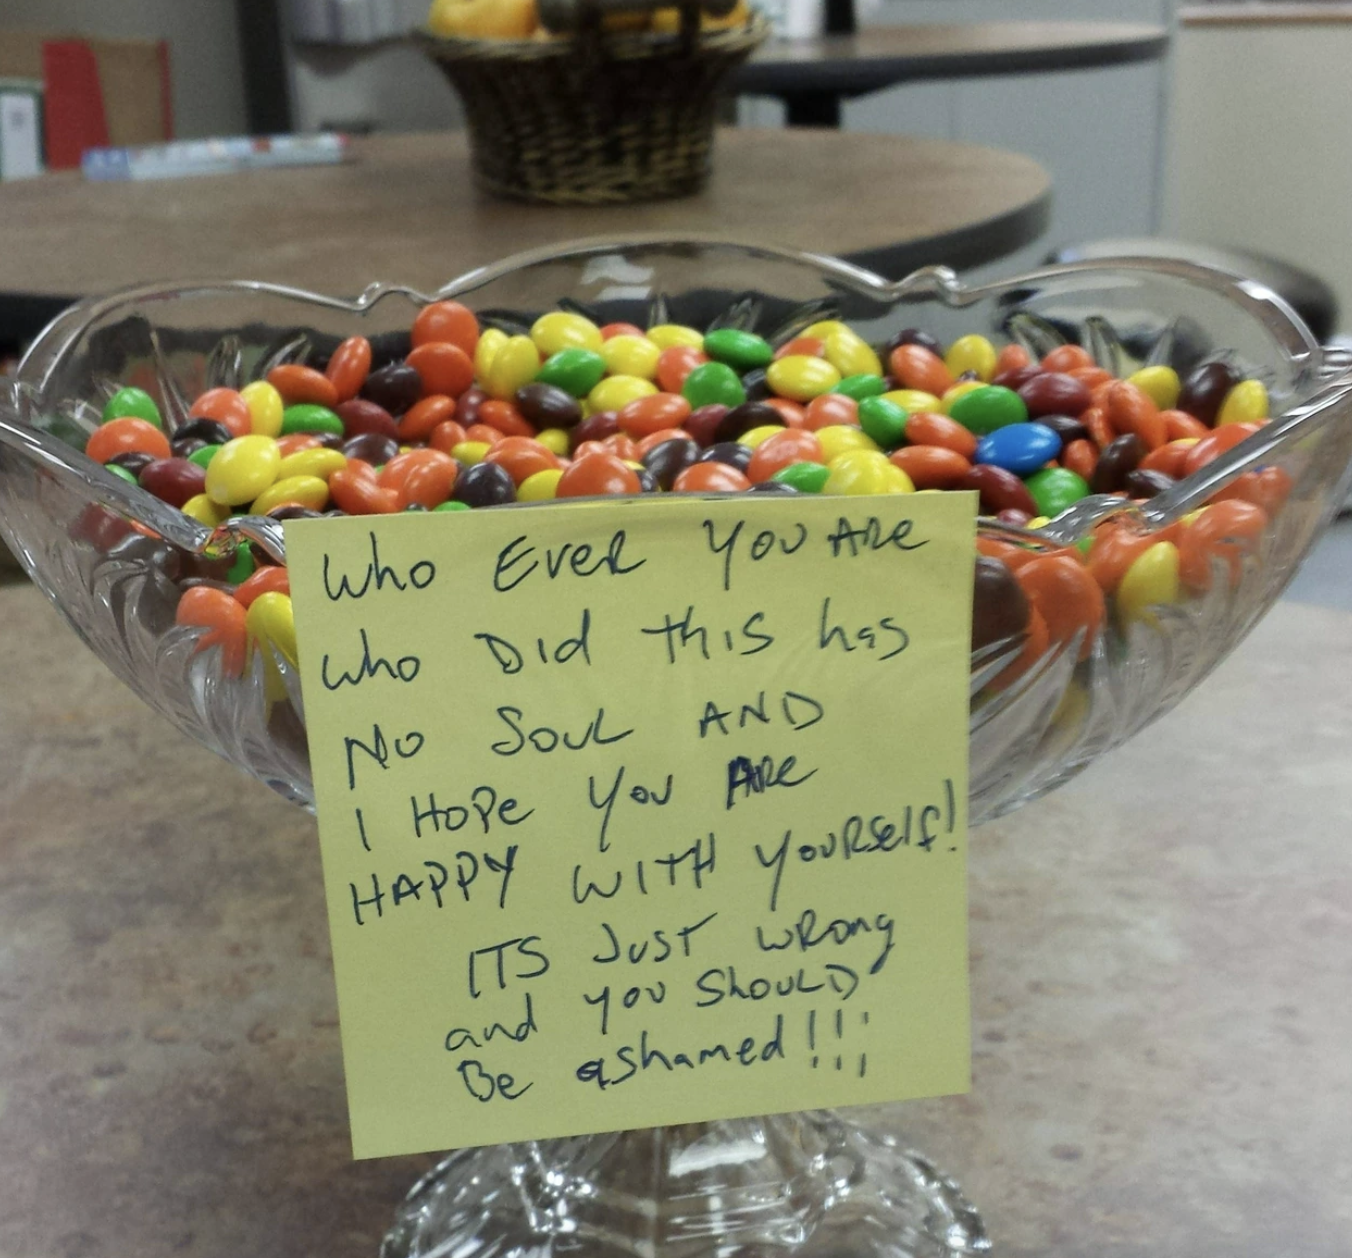 Bowl of candy-coated chocolate candies with an angry note about replacing original contents